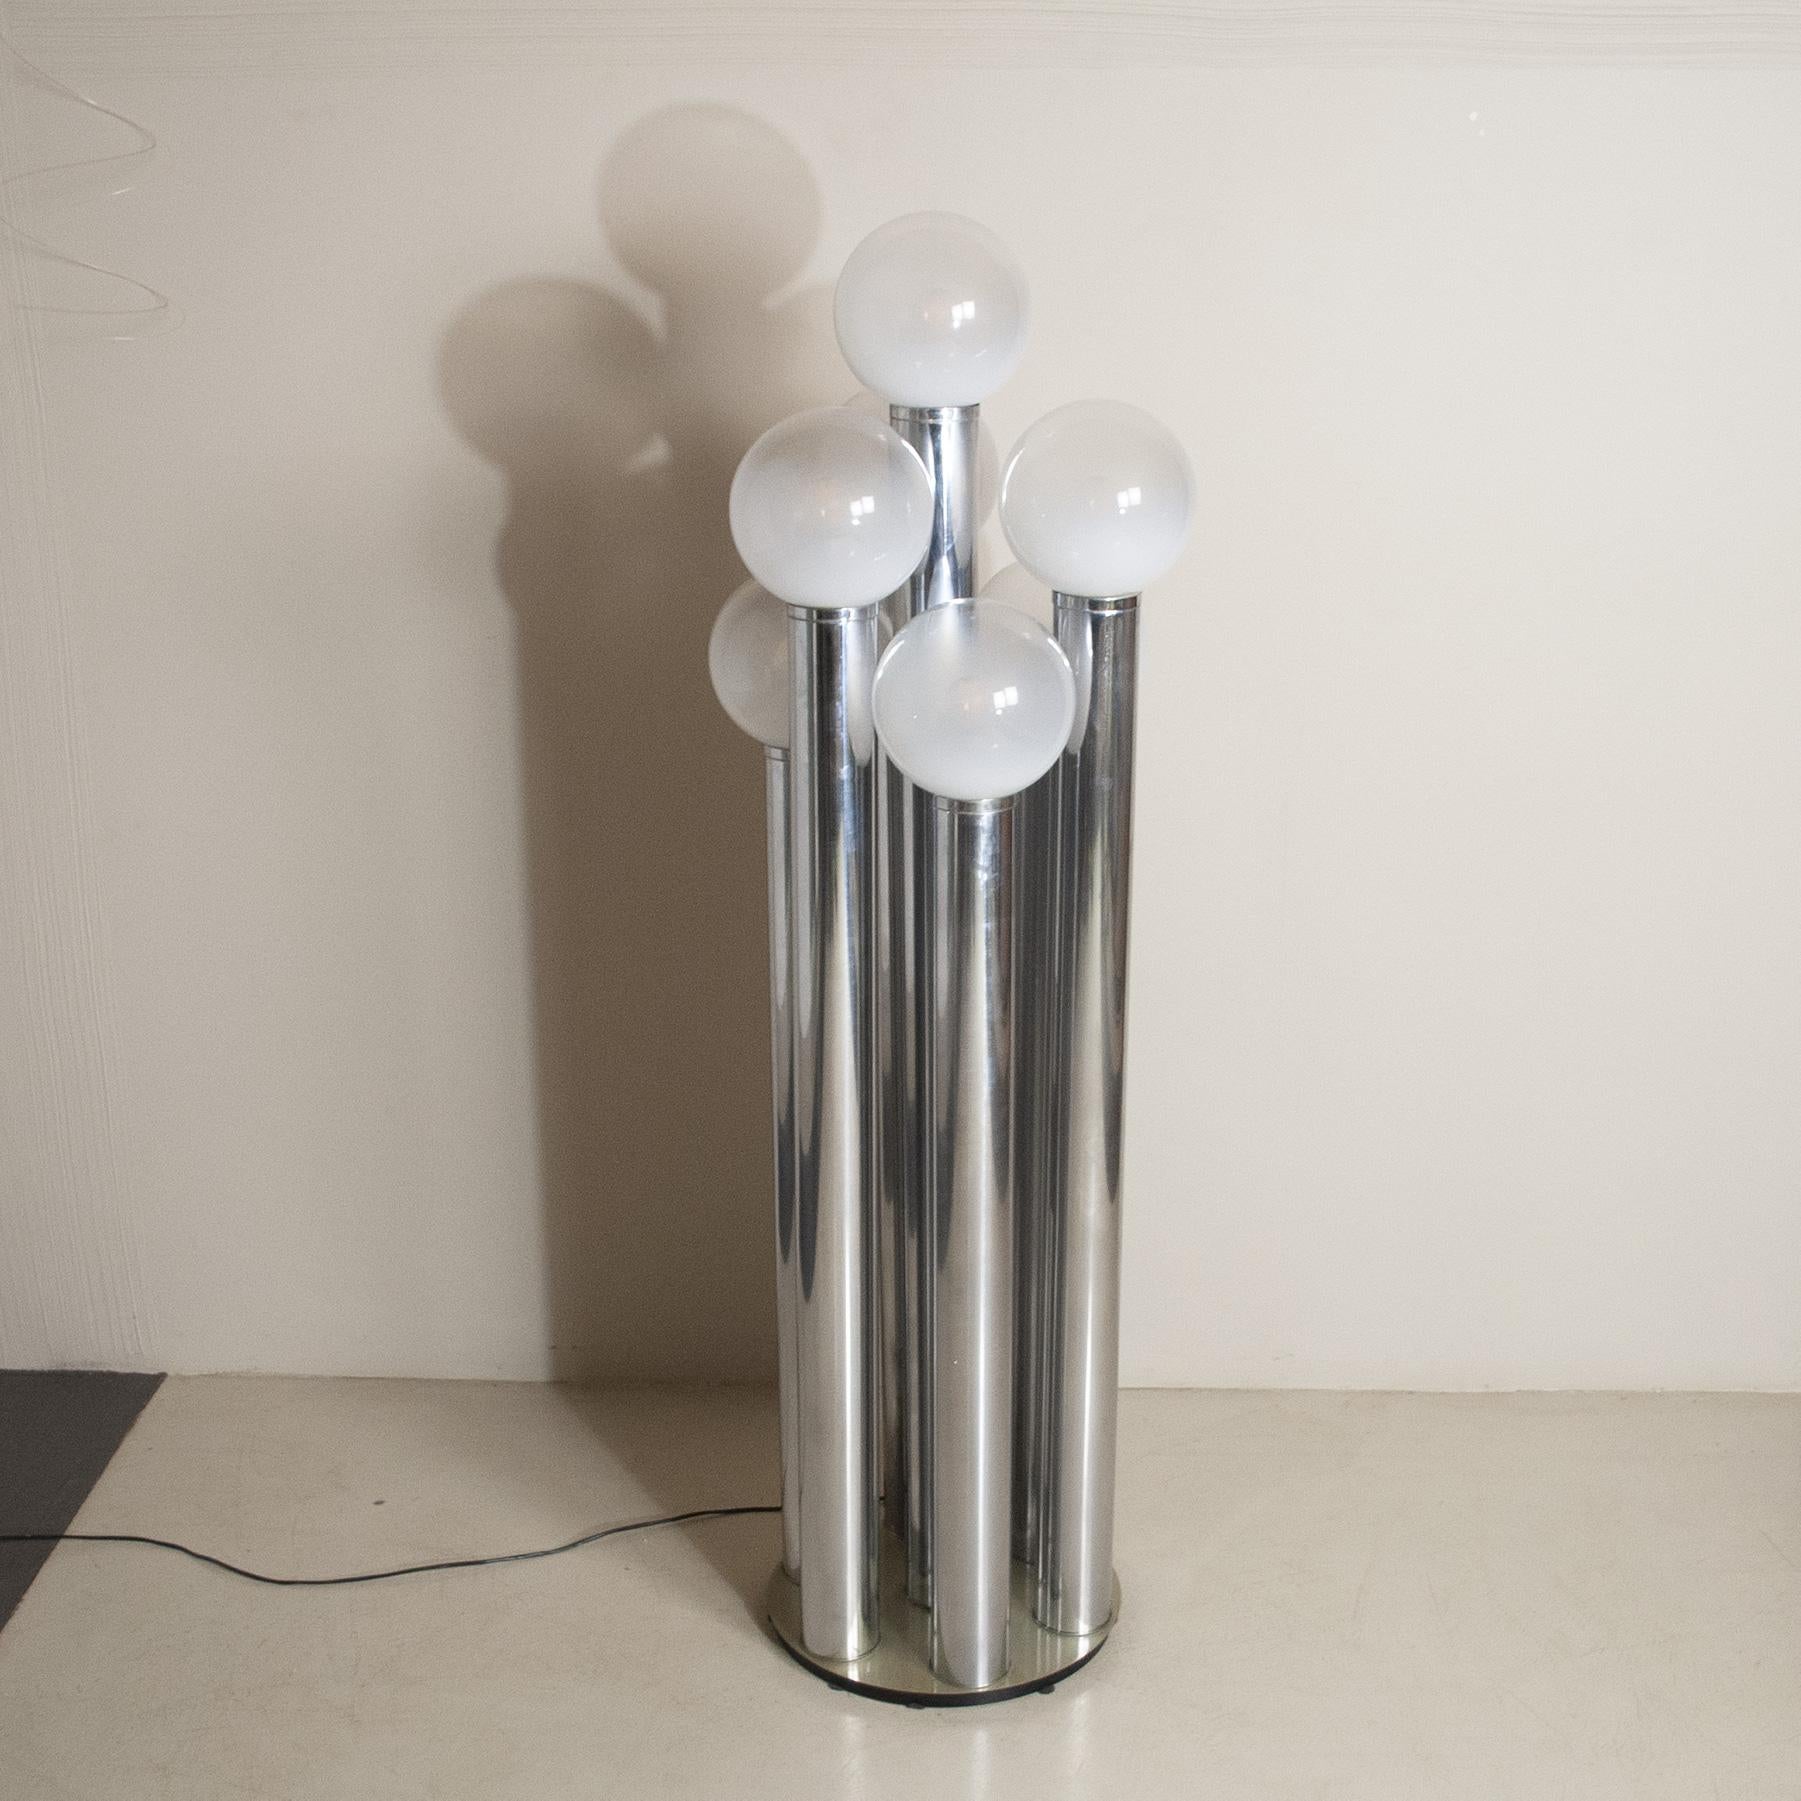 Floor lamp composed of six light fixtures in satin glass and chromed metal, Italian production, 1970s in the style of Goffredo Reggiani.